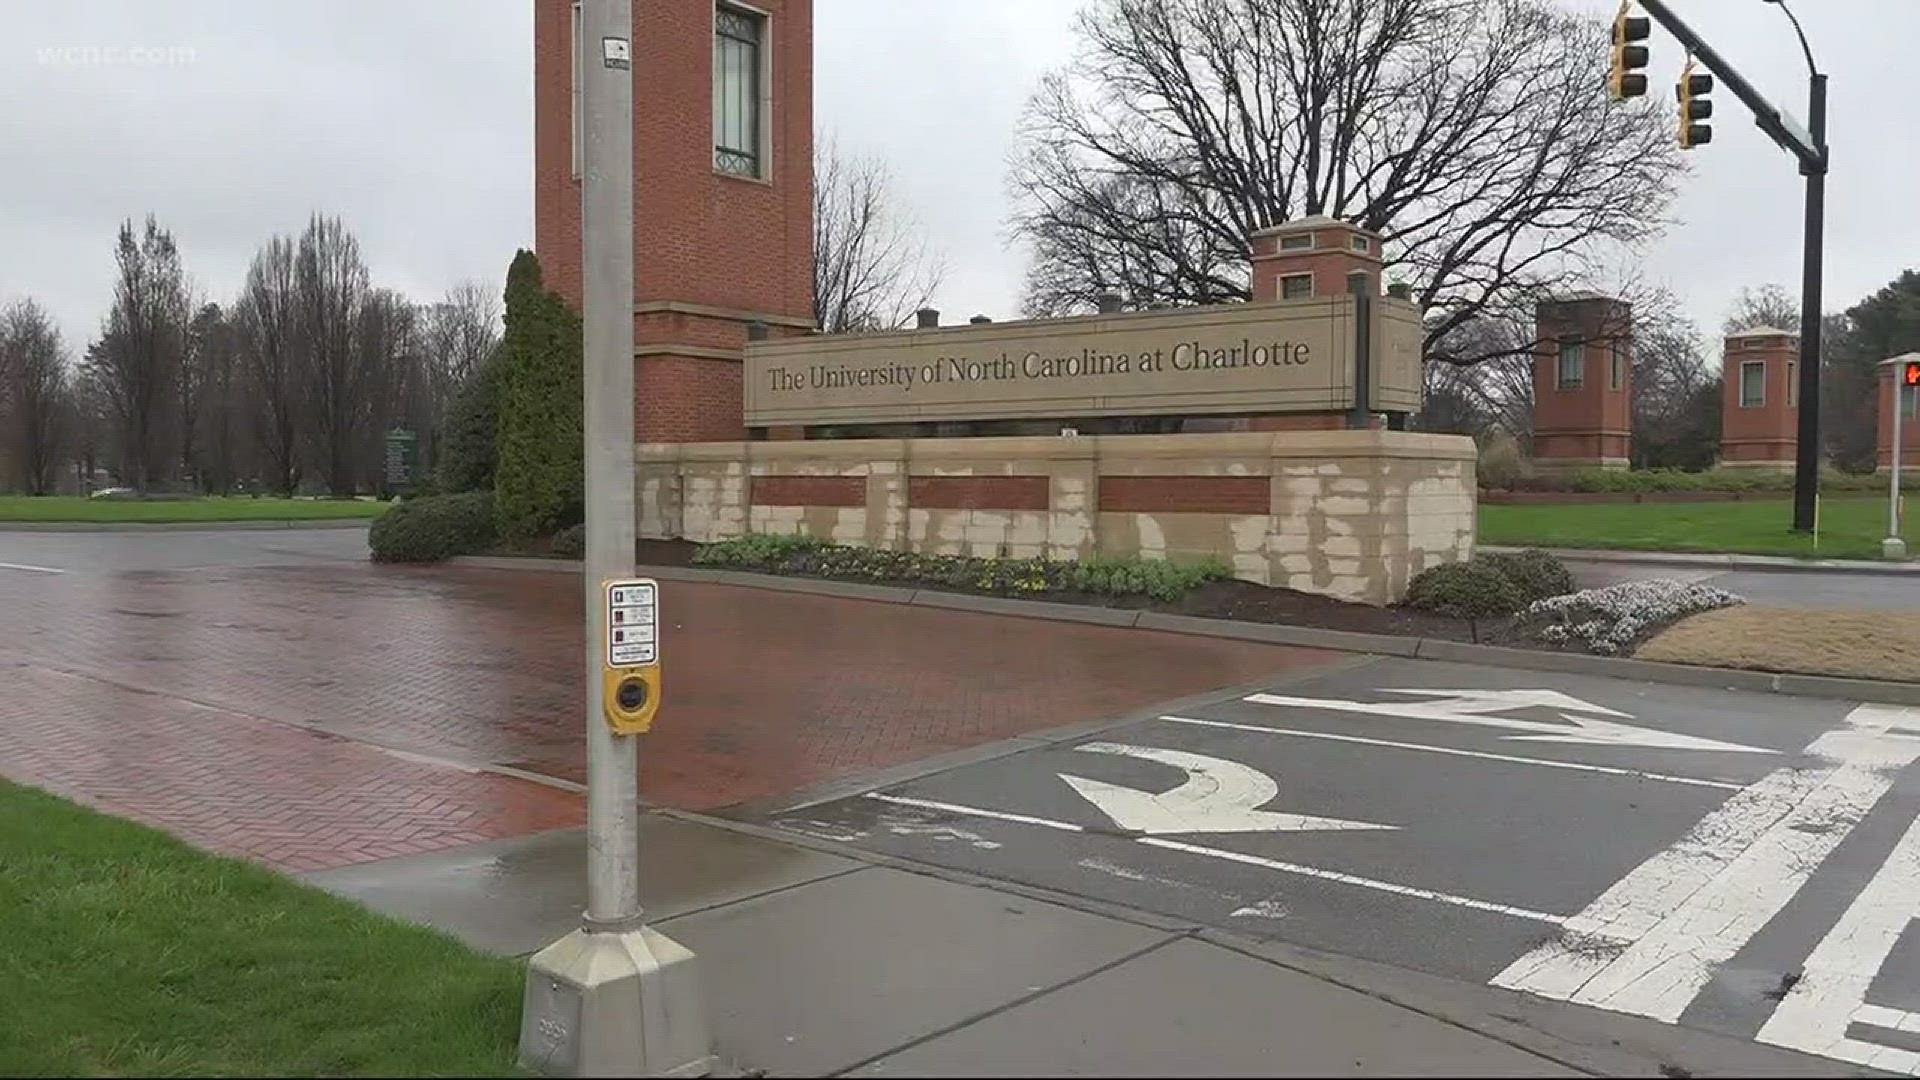 A 20-year-old student was removed from UNC Charlotte after allegedly telling a doctor he wanted to shoot up the school.